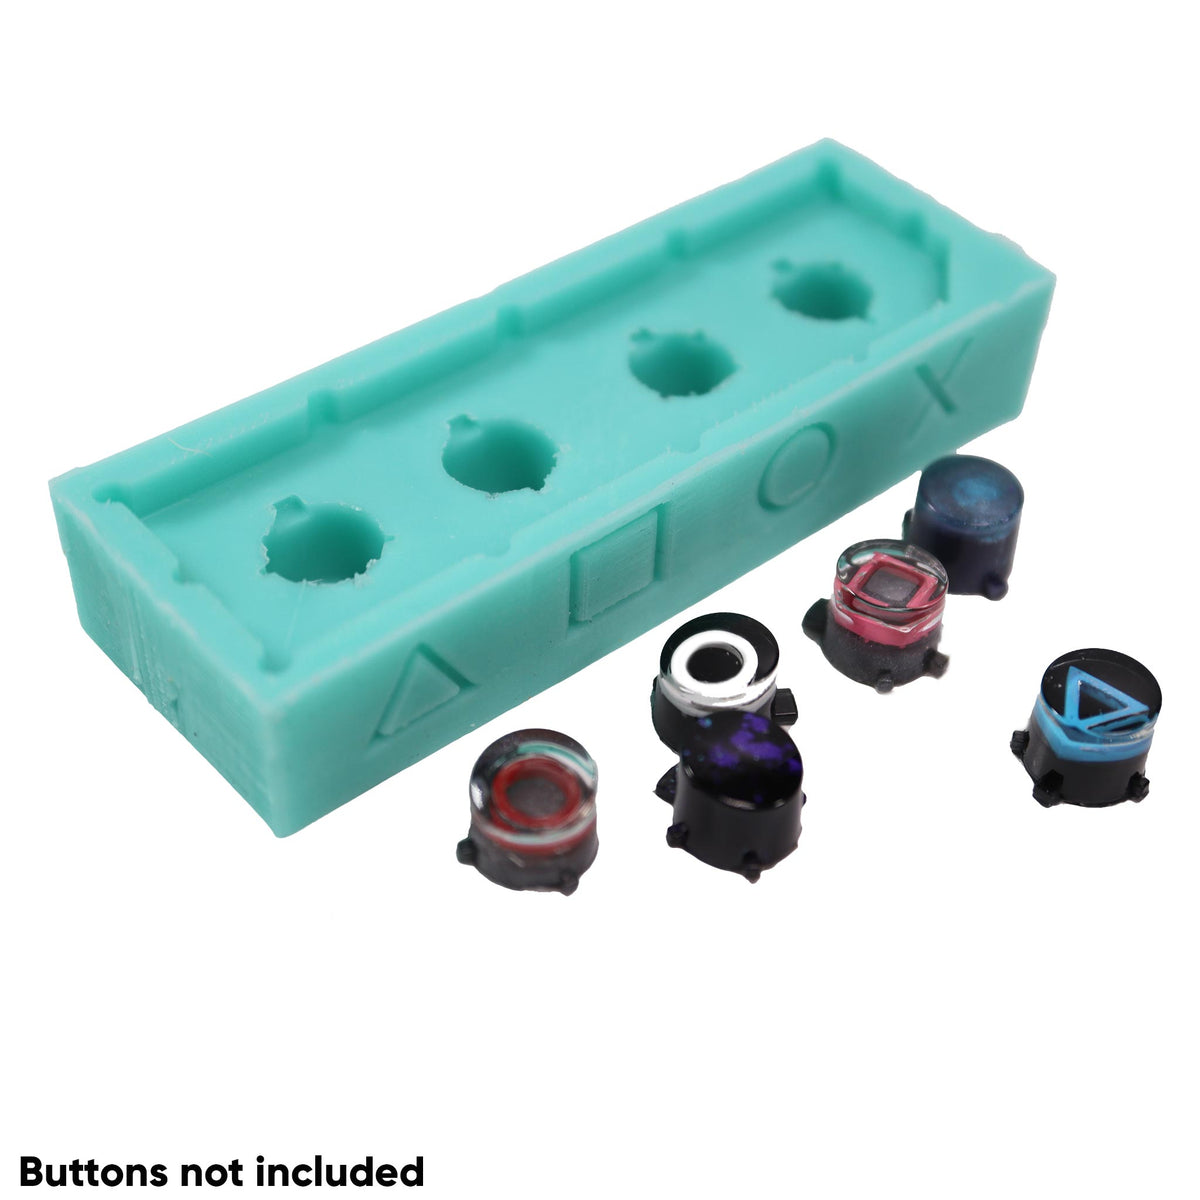 PS5 Button Silicone Mold Set - Make Your Own Custom Controllers